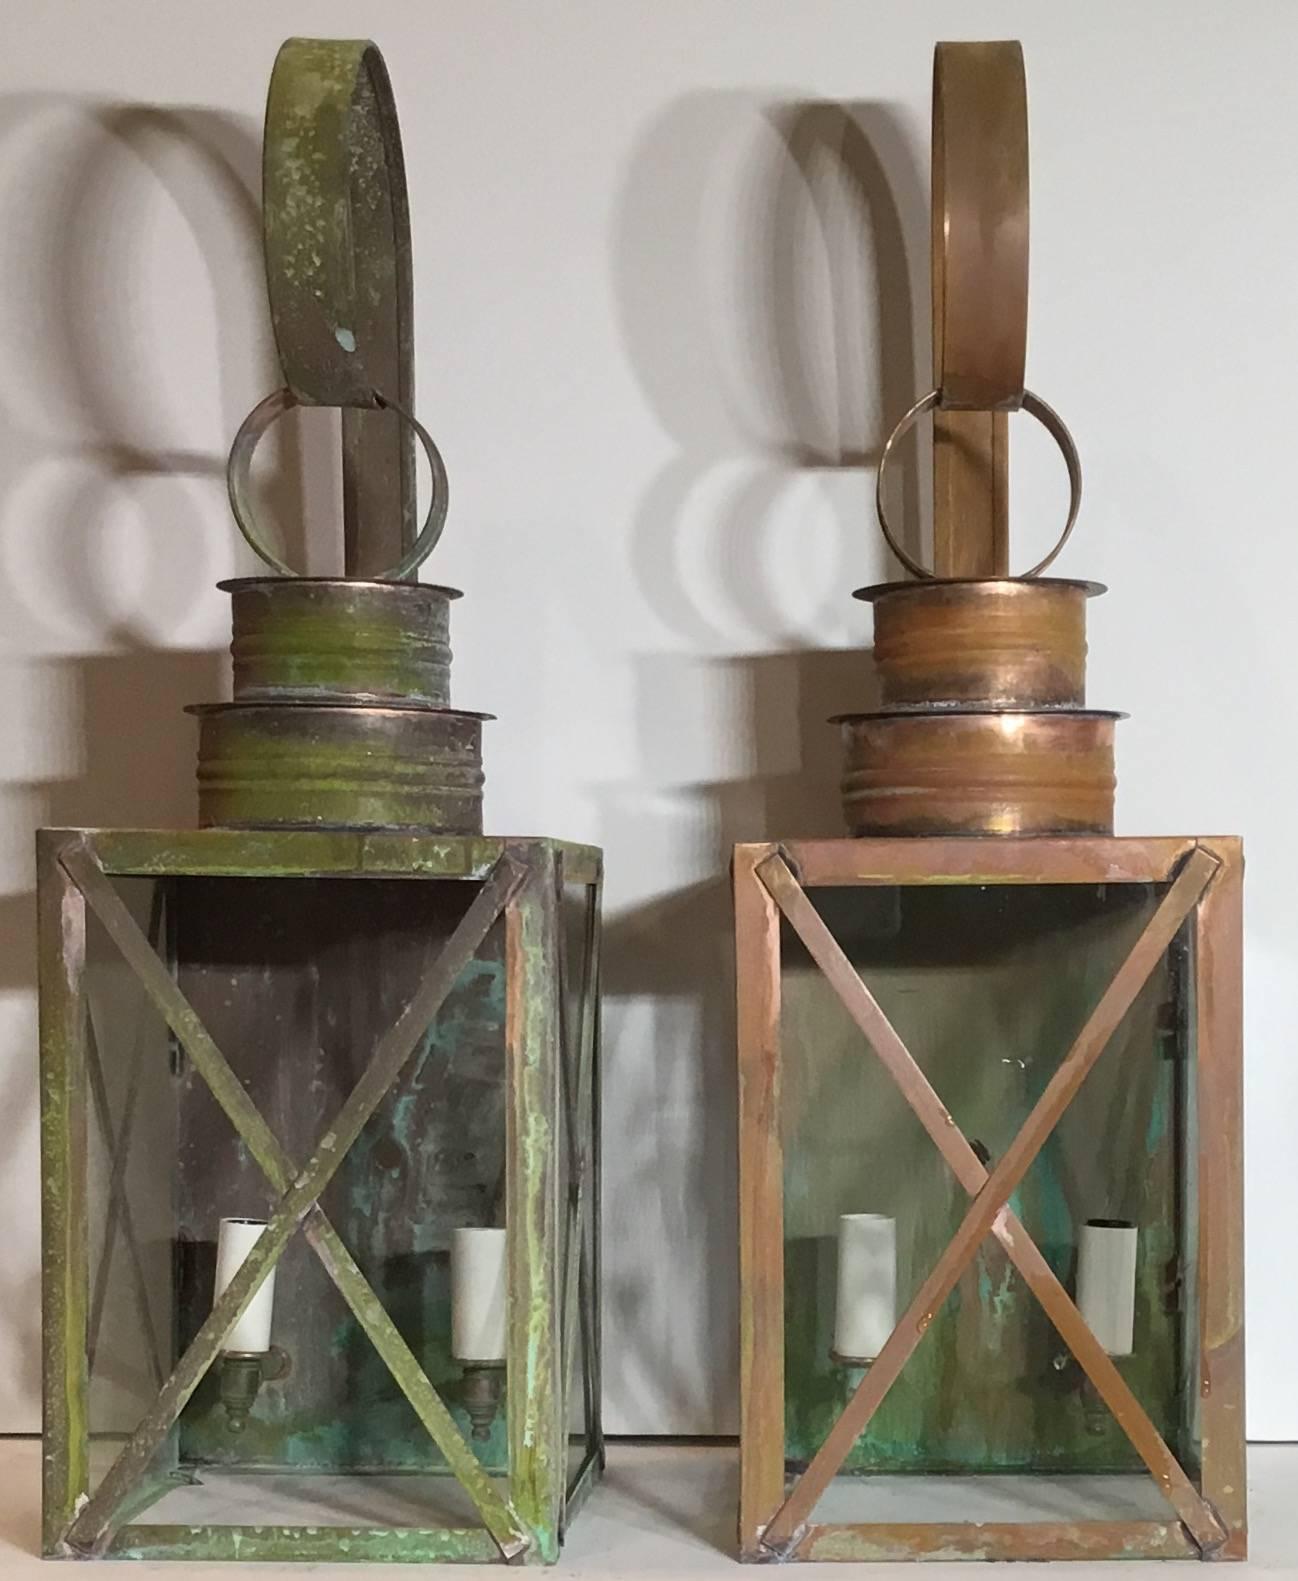 Pair of architectural wall copper lanterns made of copper, with two 60/watt
Lights, electrified and ready to light.
UL approved, up to US code.
Suitable for wet location.
 